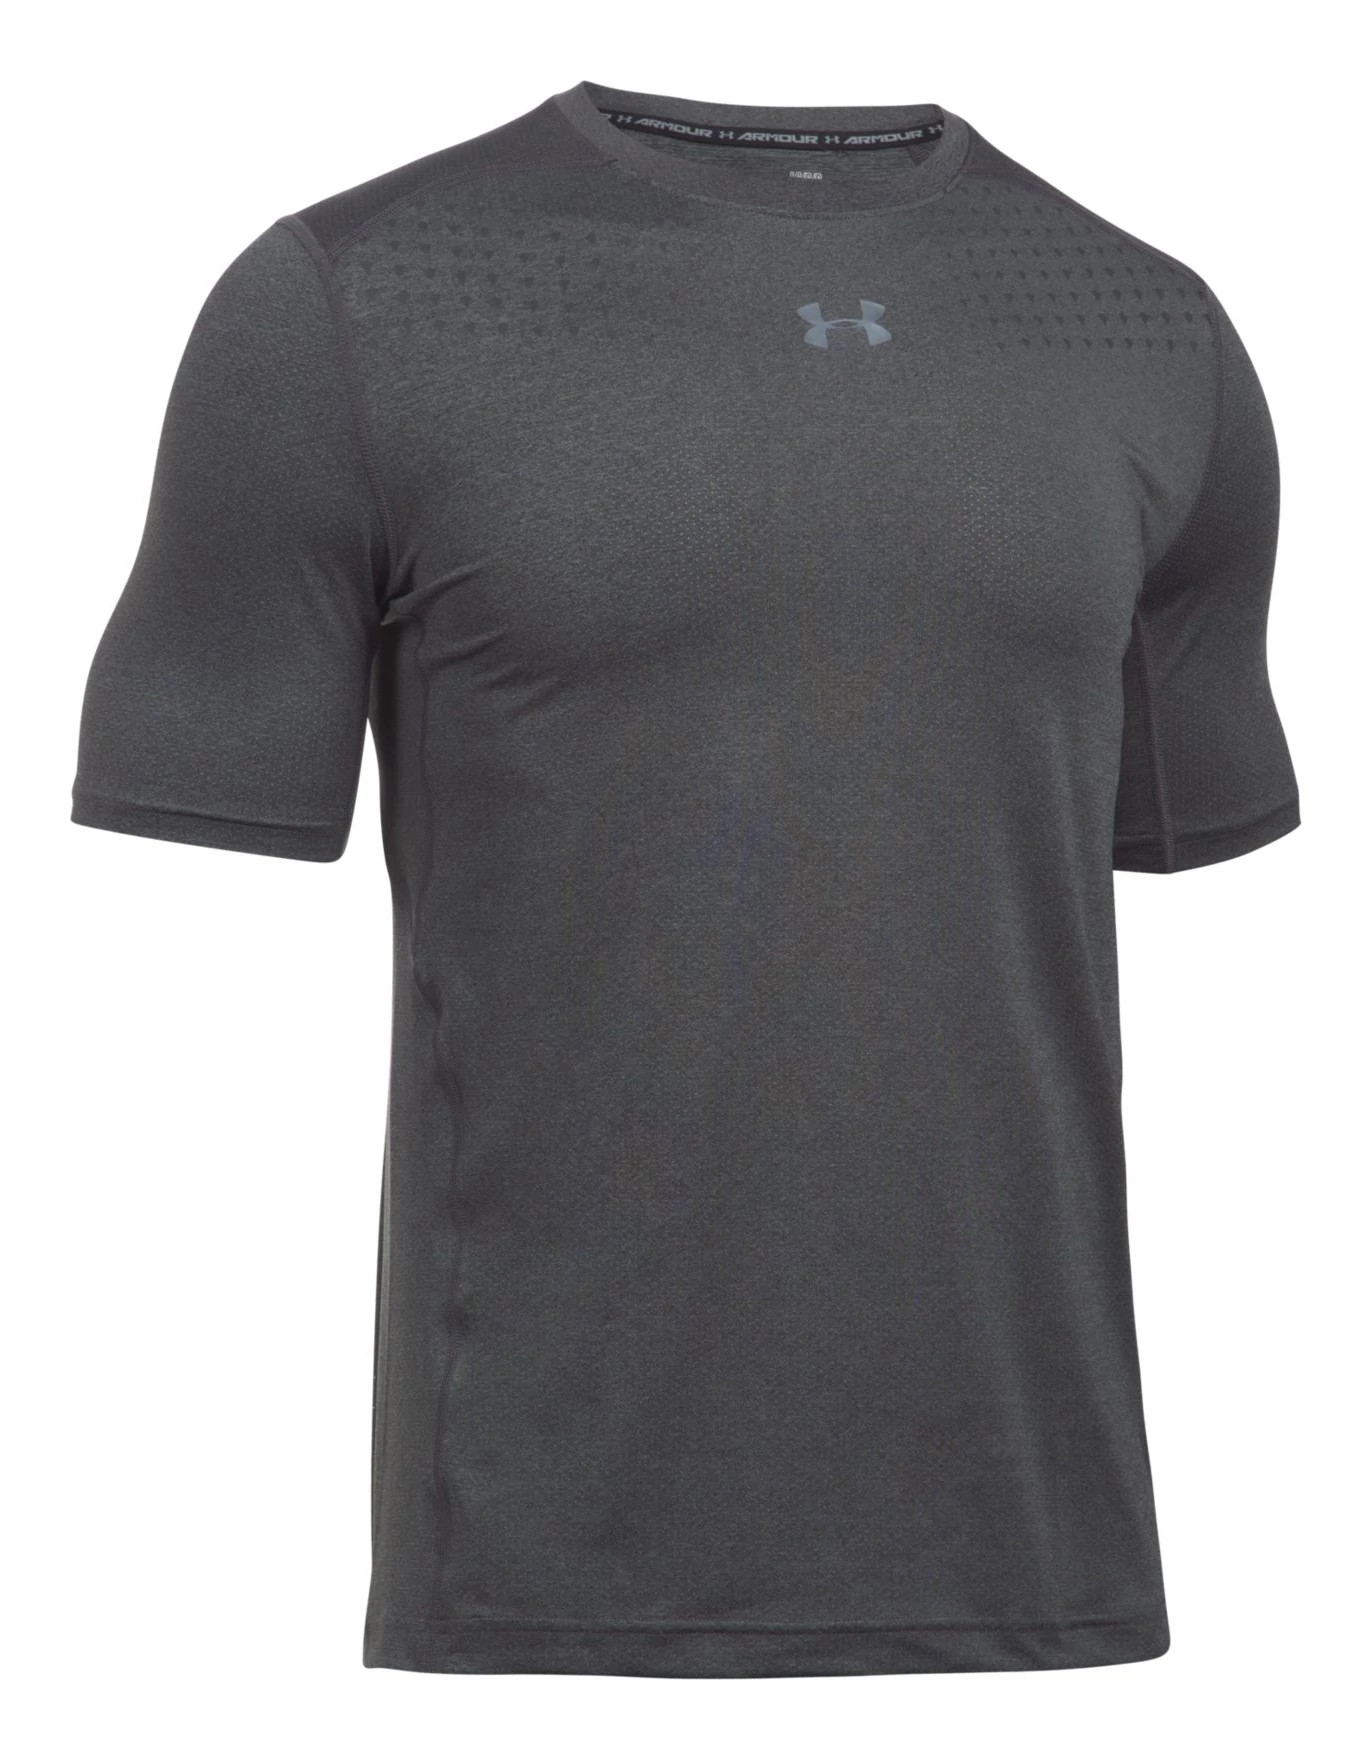 Under Armour Coolswitch Compression Shortsleeve Tee Graphite